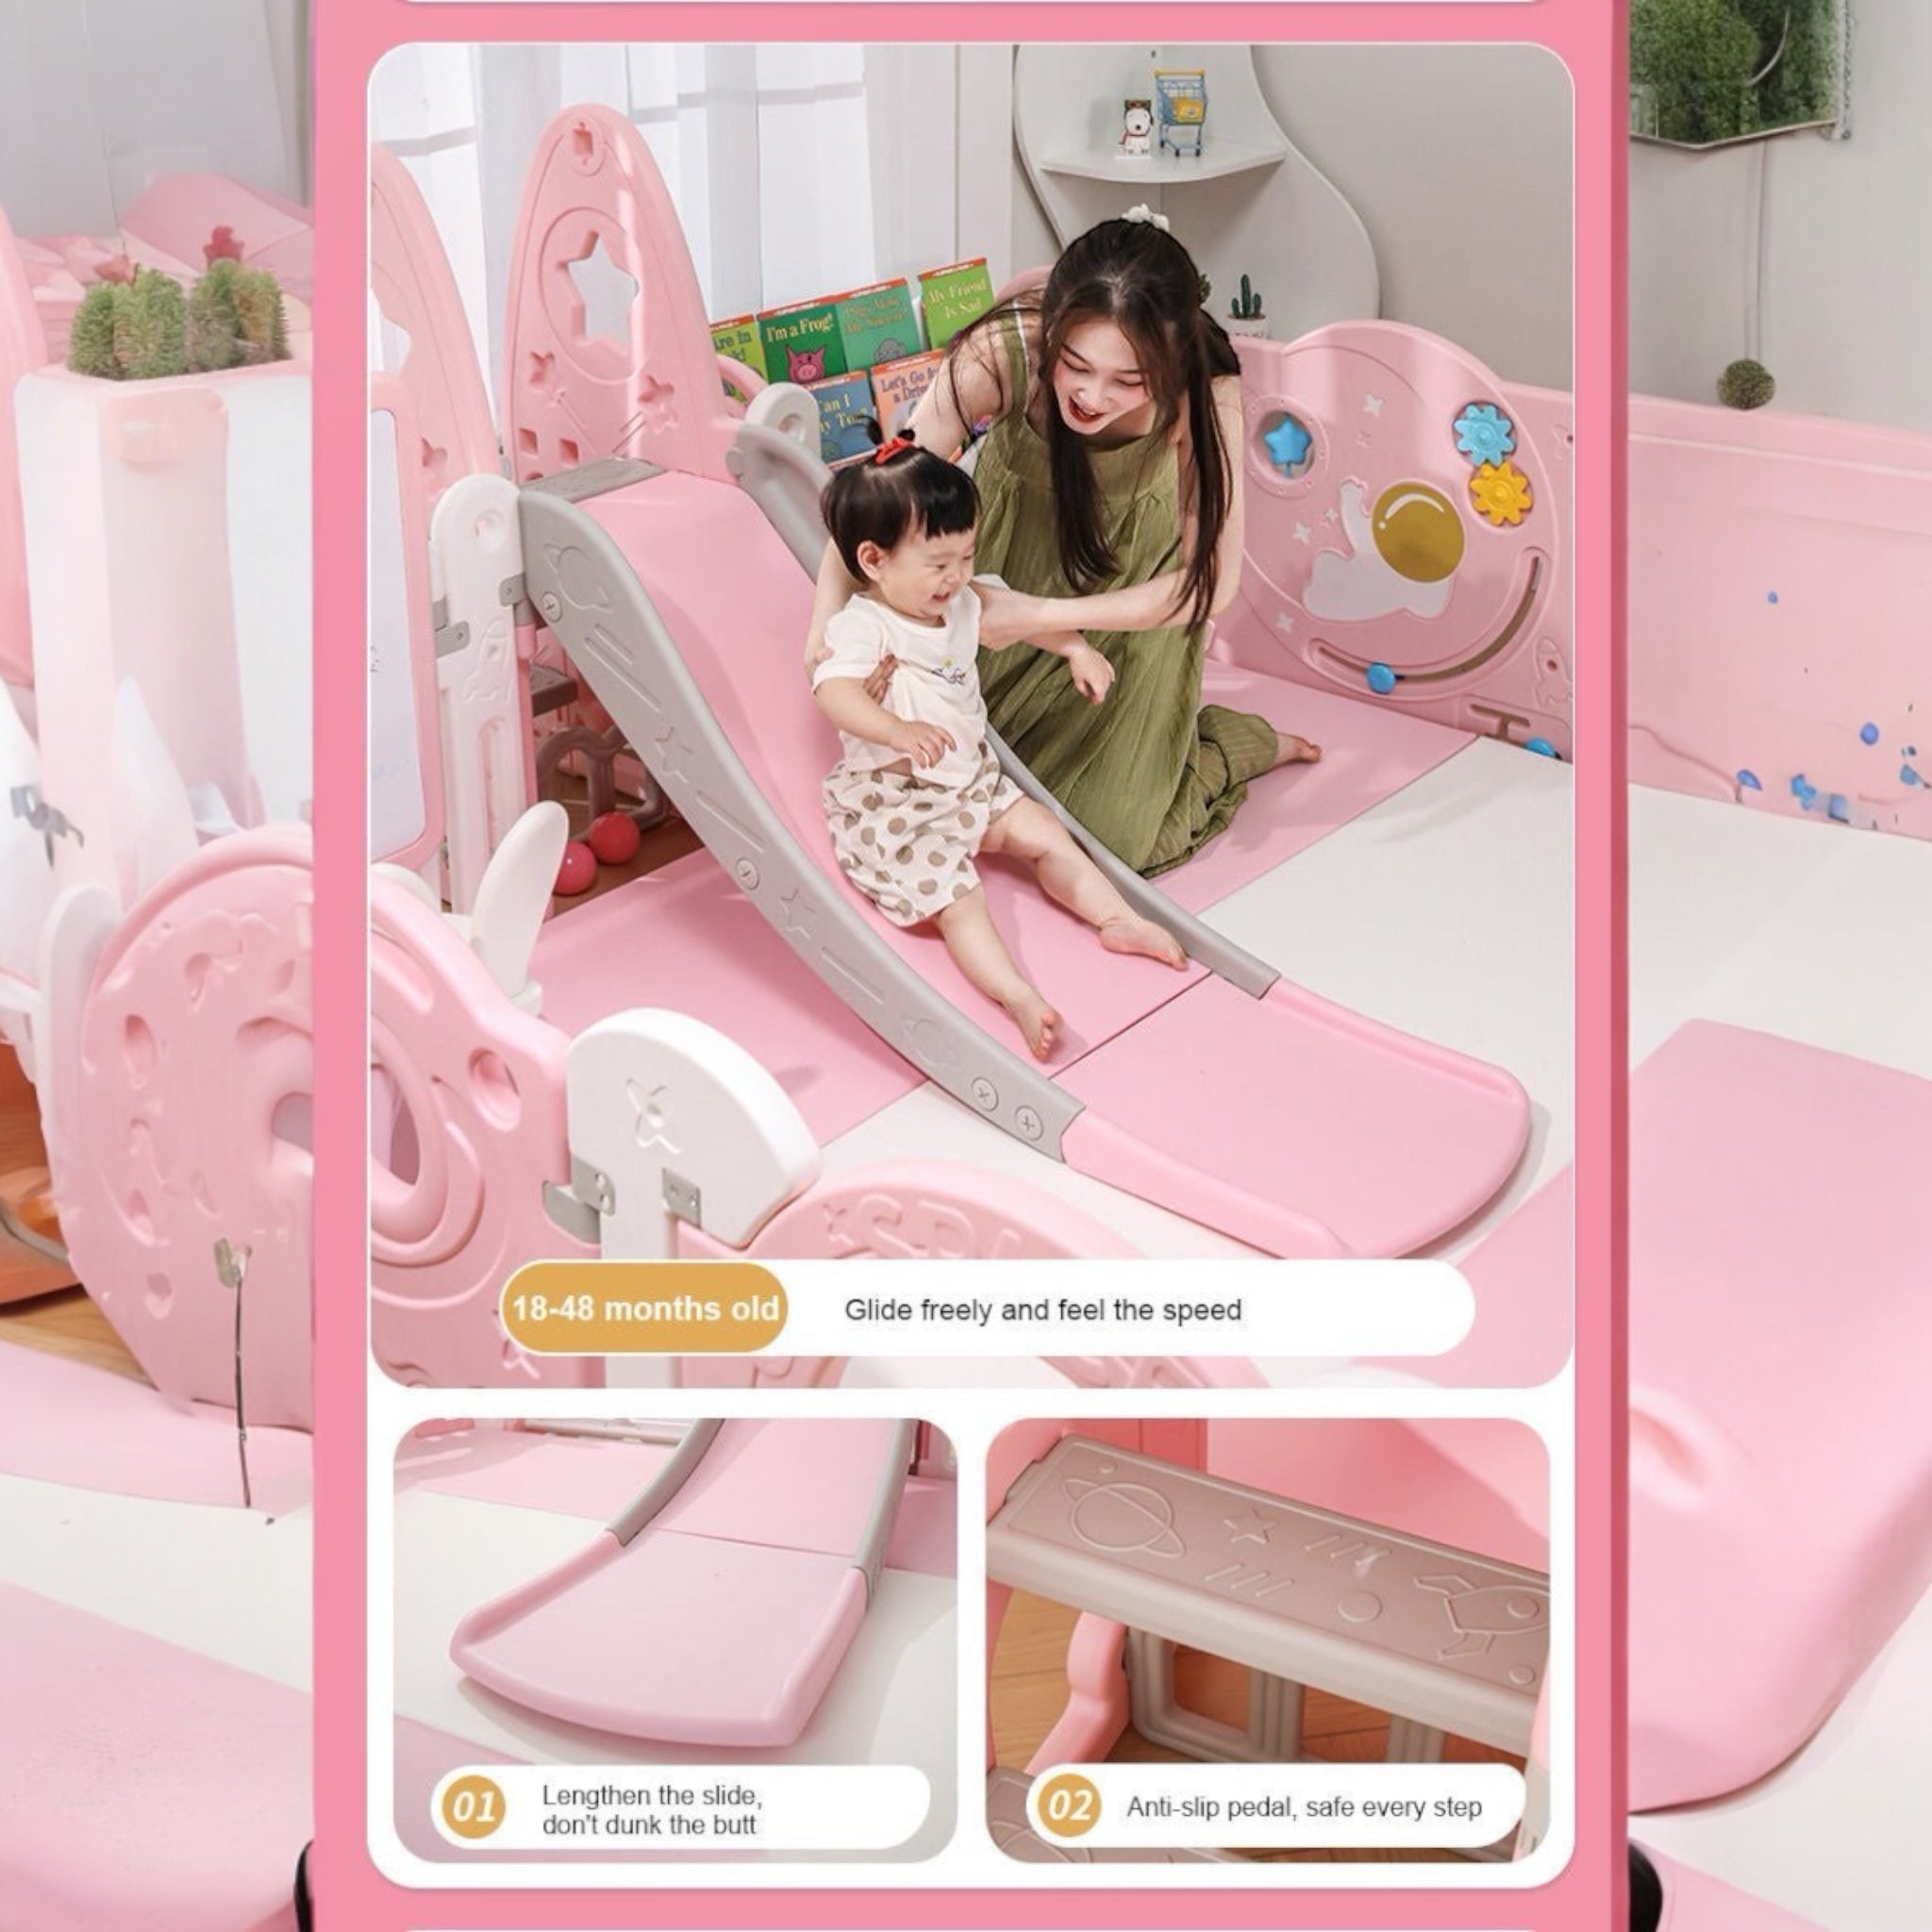 Multi-Combination Luxury Baby Play Yard Safety Plastic Fence Kids Large Playpen Portable Playground For Children Indoor